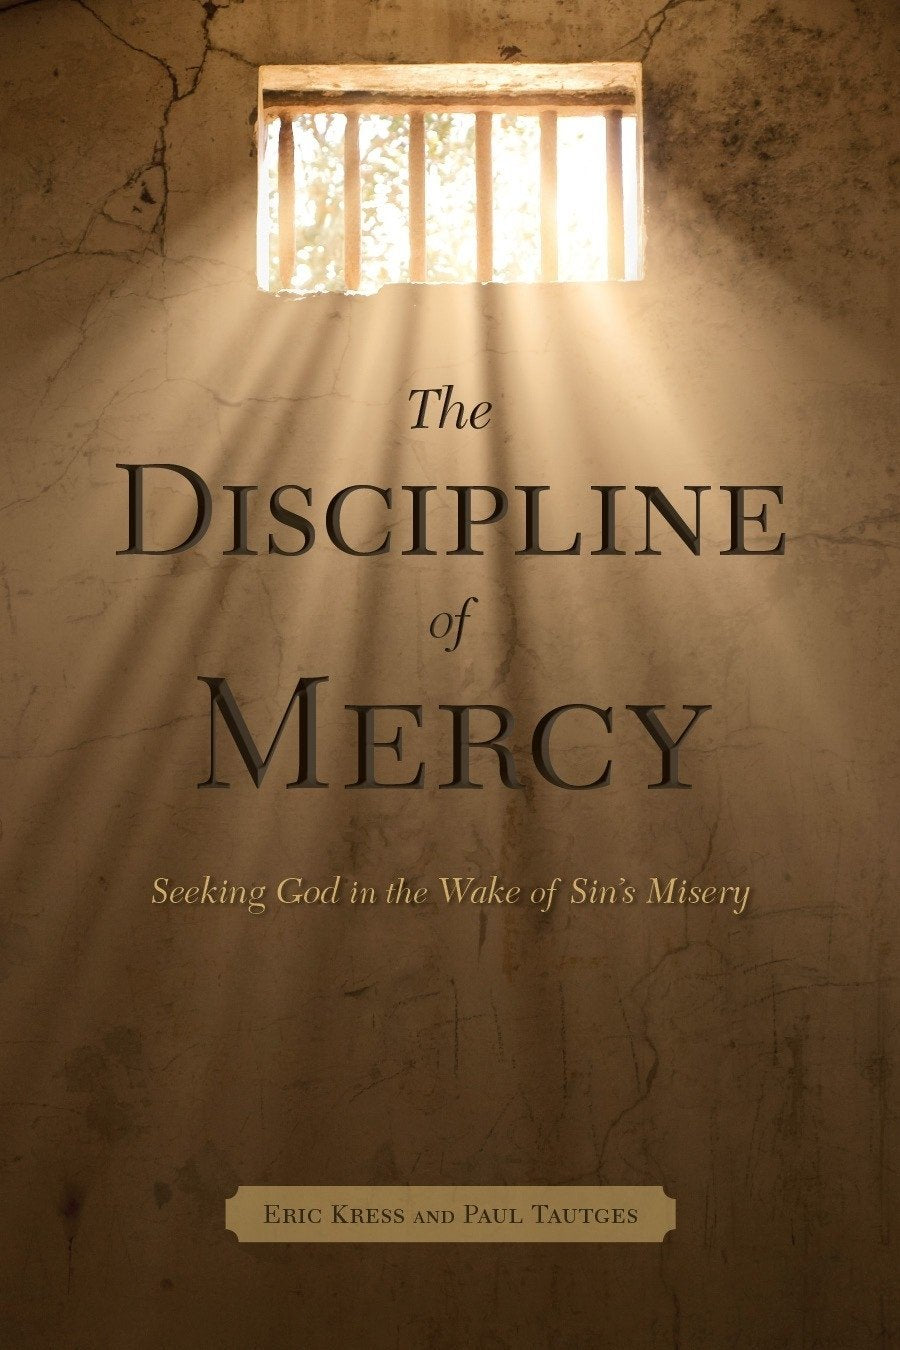 The Discipline of Mercy: Seeking God in the Wake of Sin's Consequences